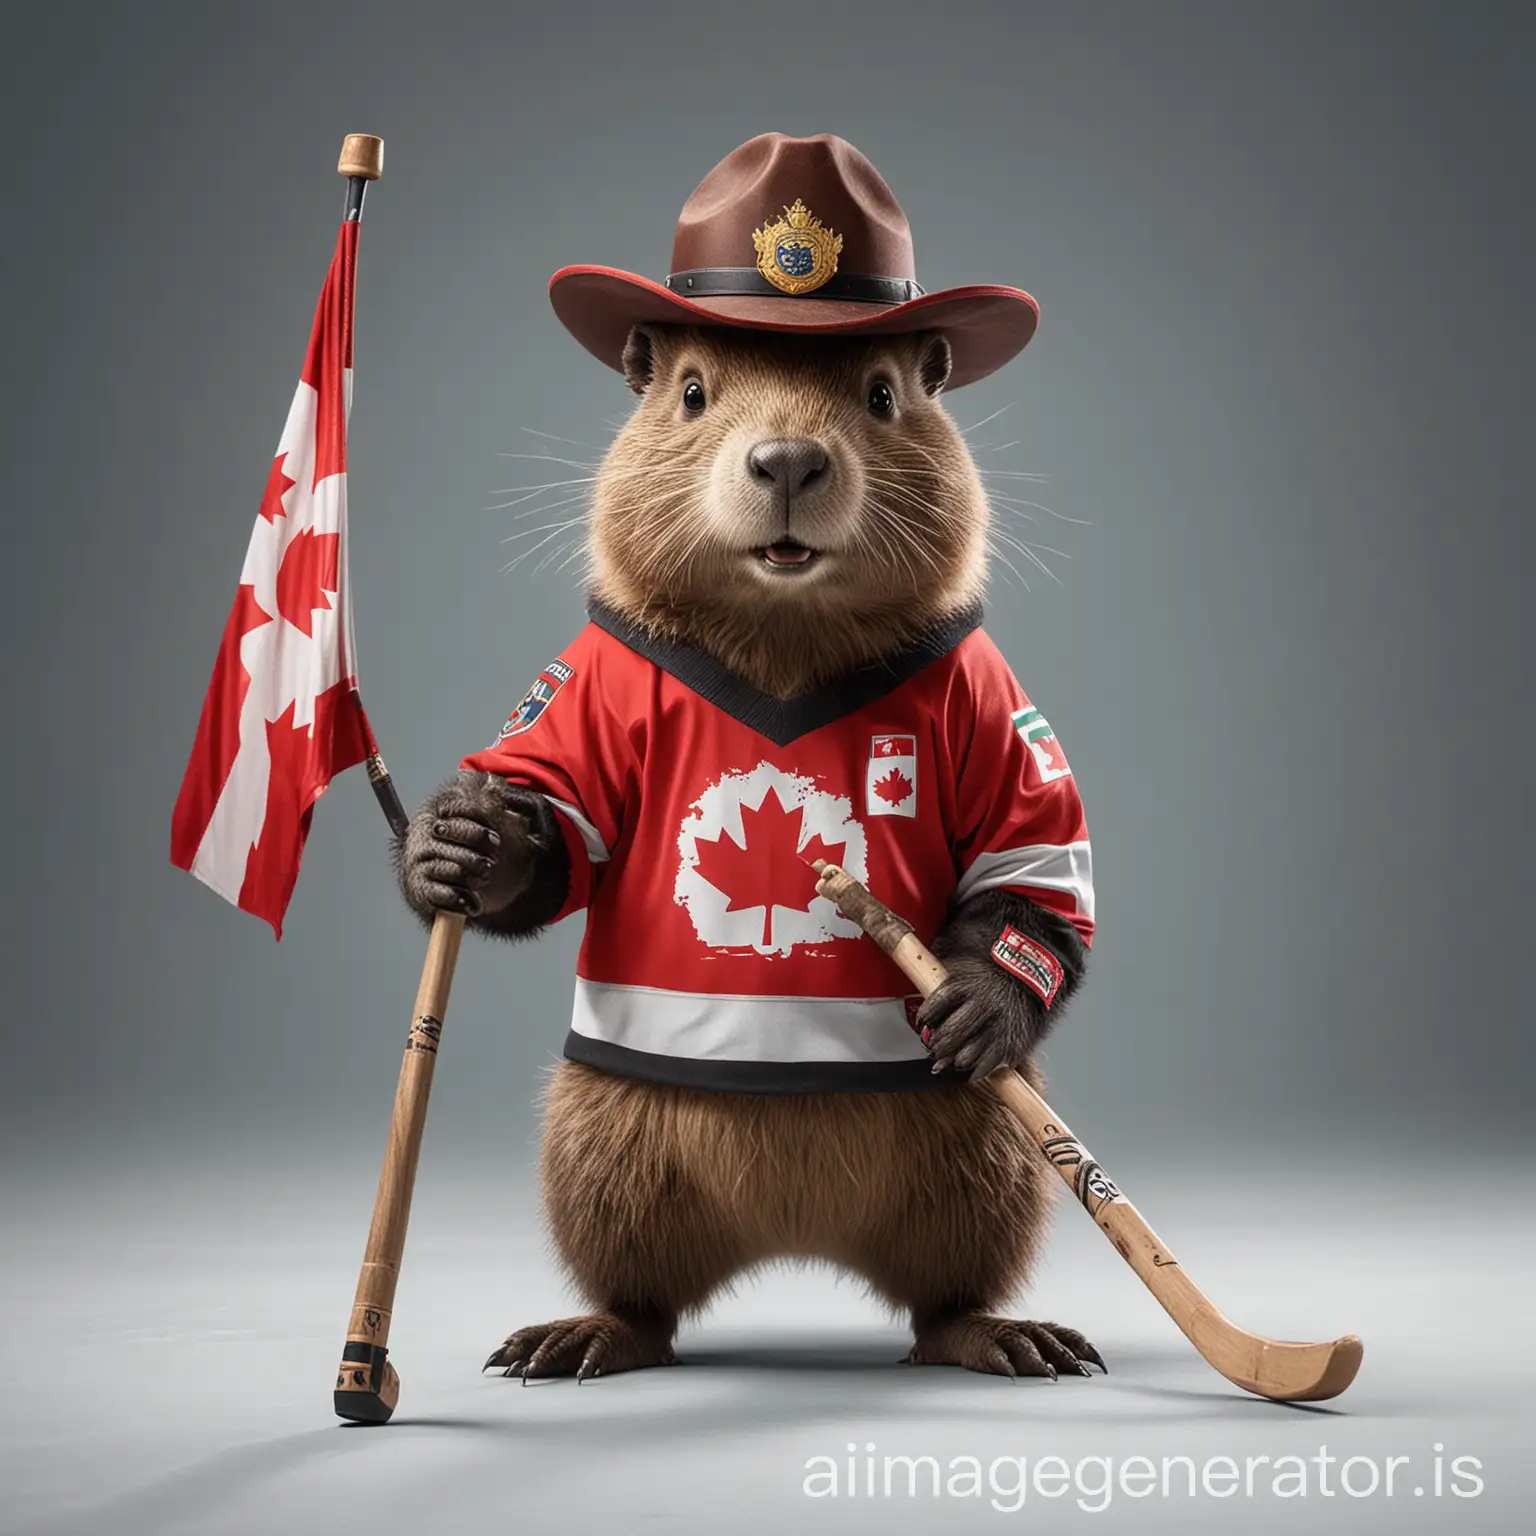 Beaver wearing a Canadian Mounted Police Hat, a Hockey jersey, holding a hockey stick in one hand with a Canadian flag attached to the top.